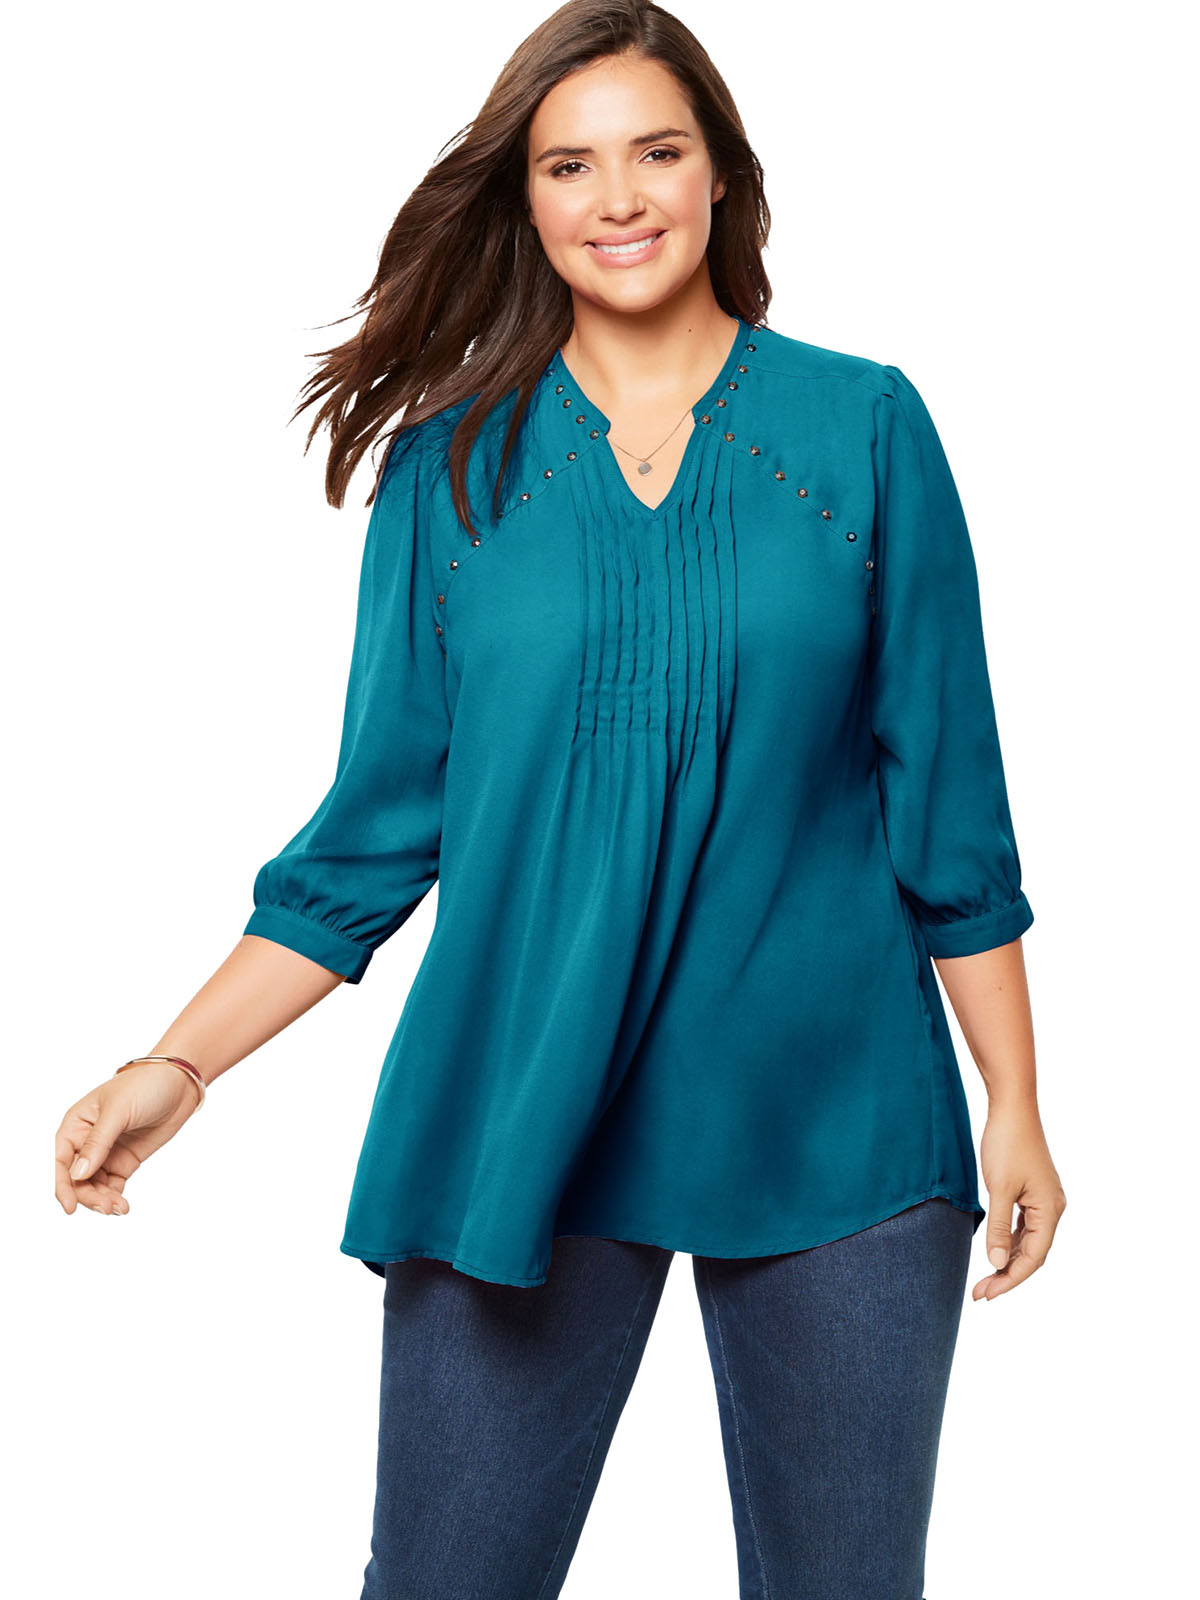 Woman Within - - Woman Within DARK-TEAL Studded Pintuck Blouse - Plus ...